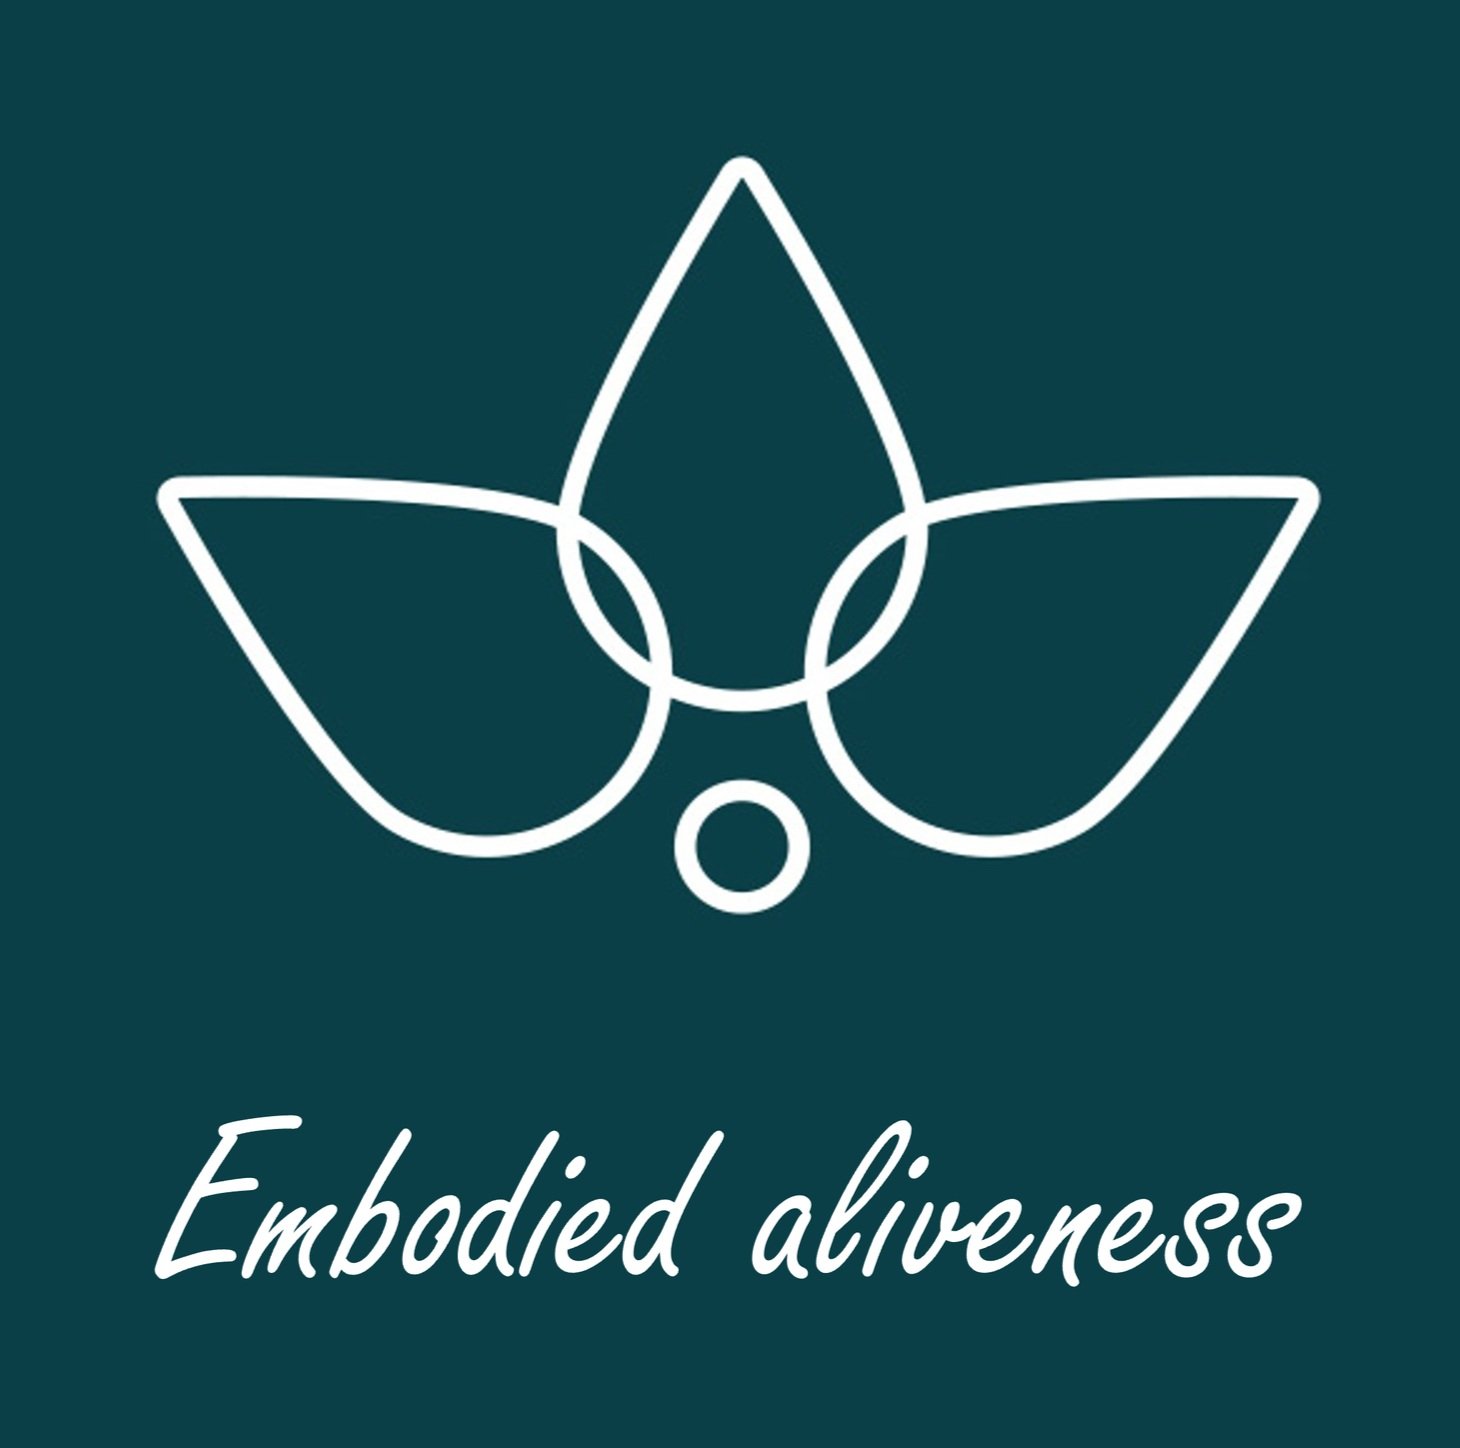 Embodied aliveness